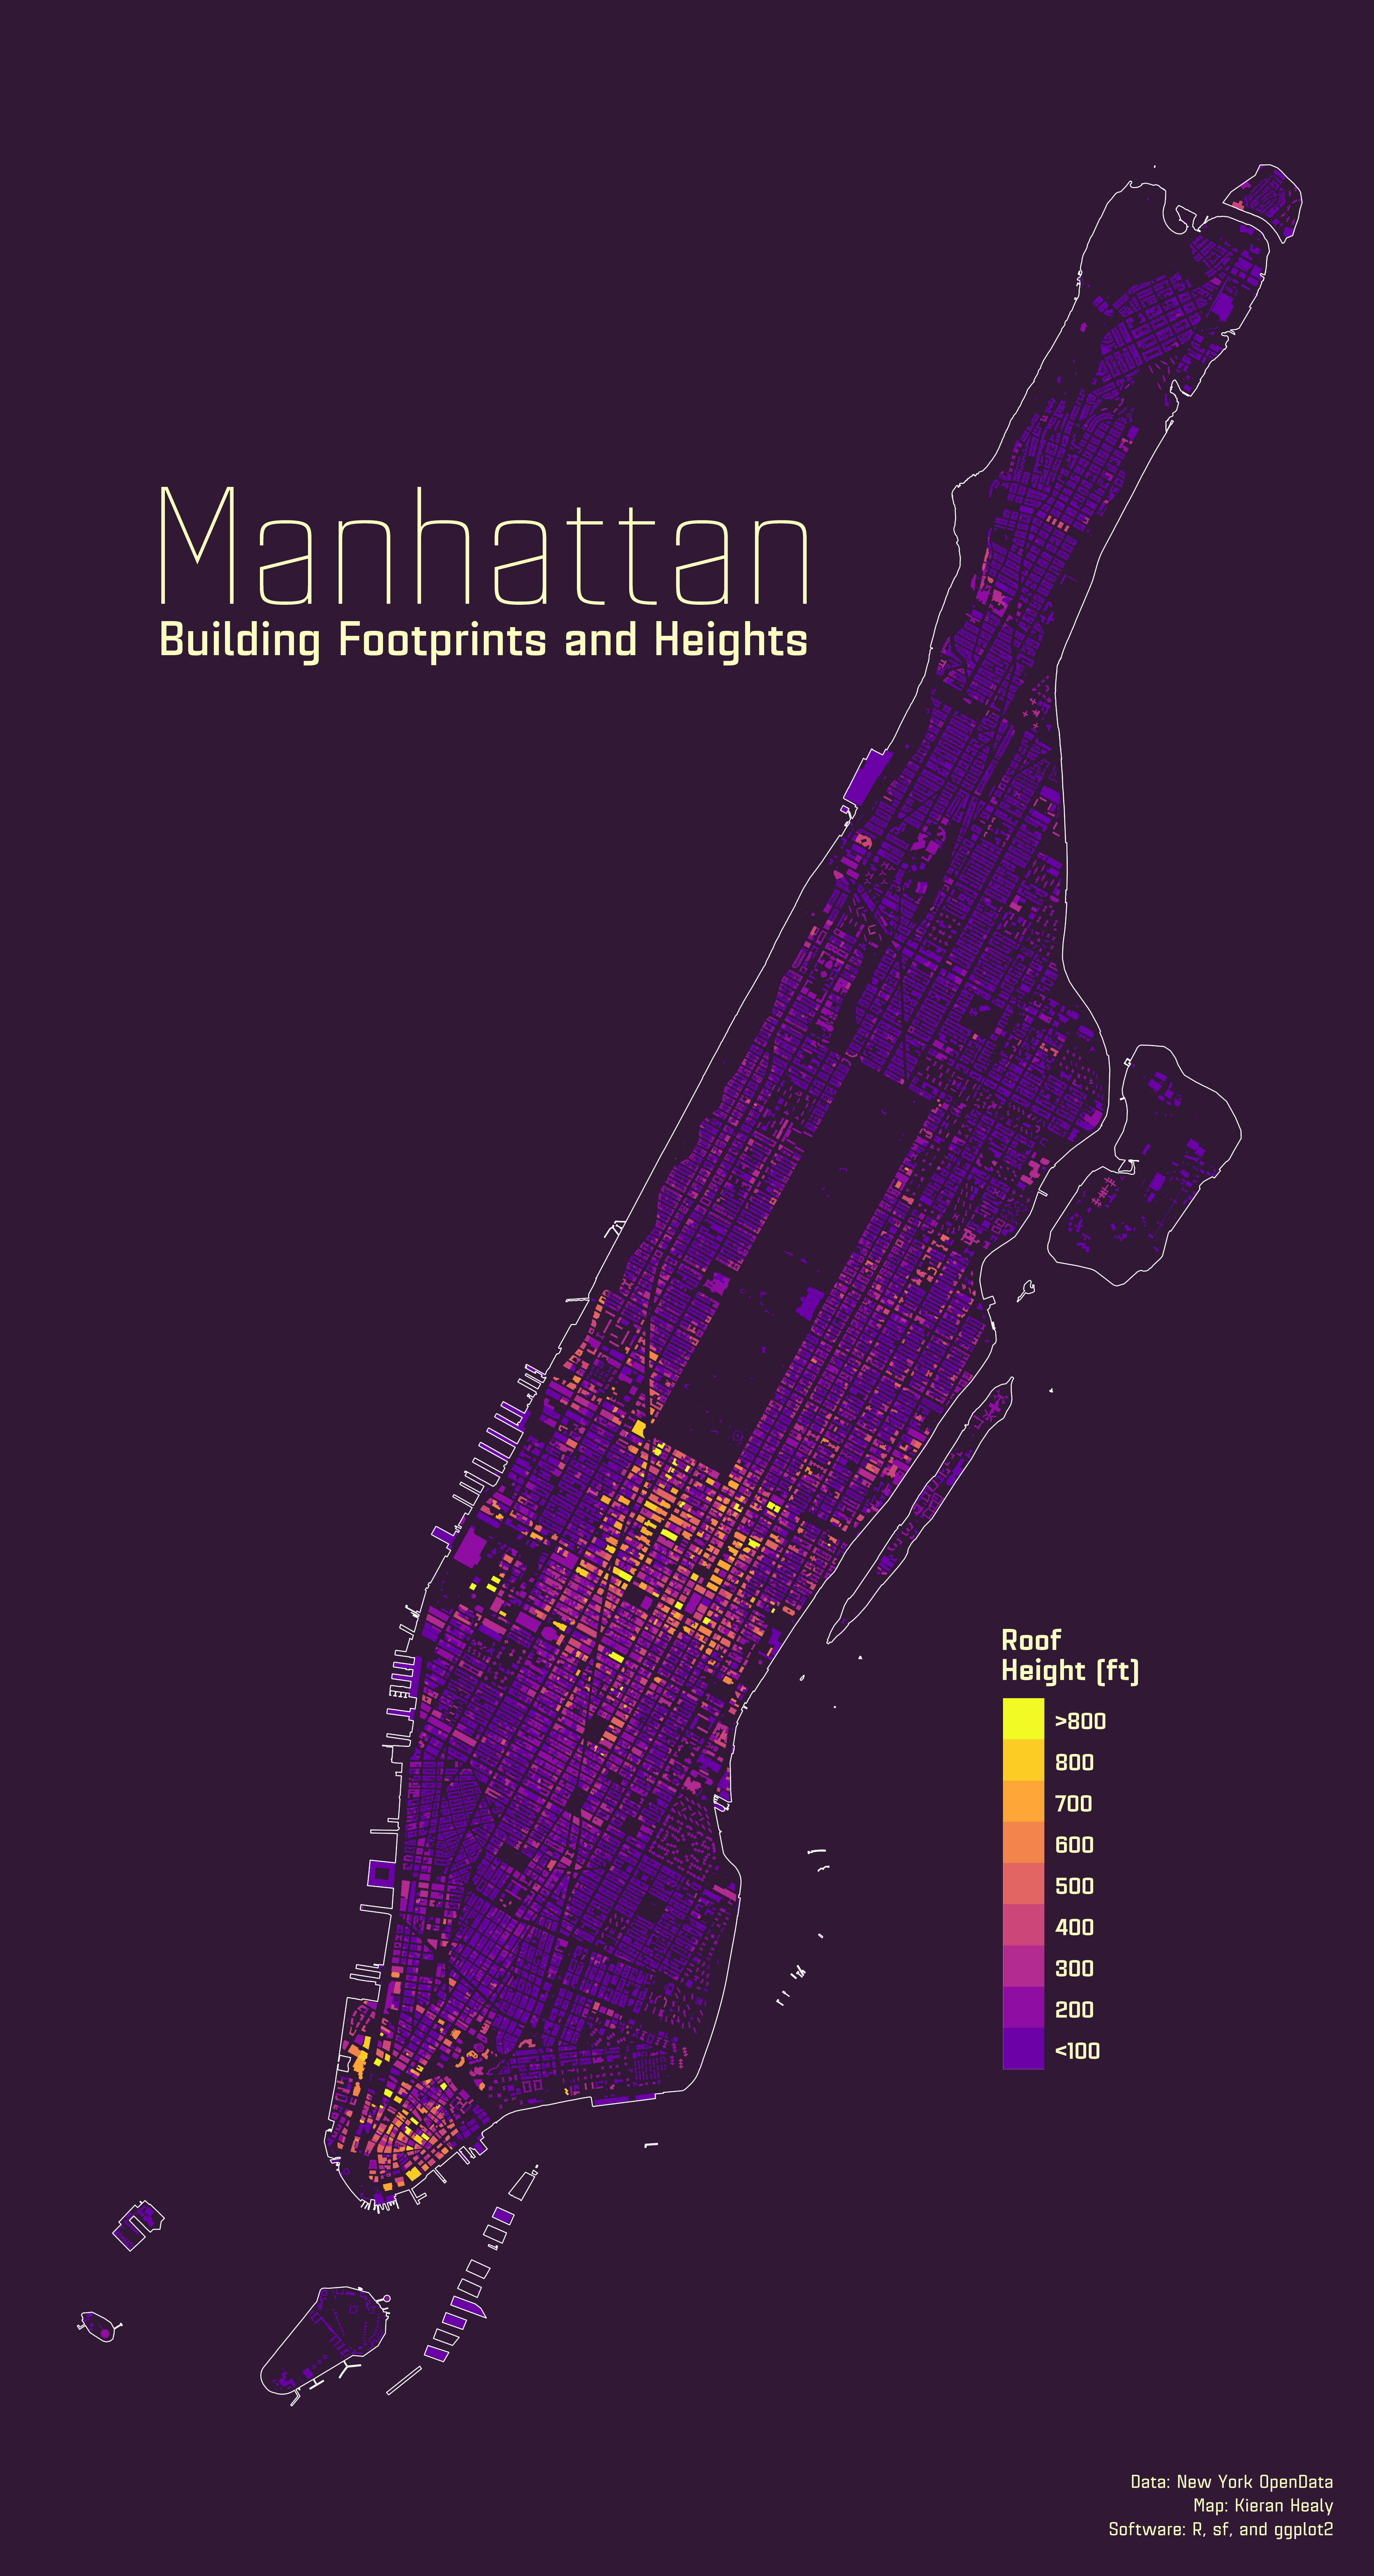 Building footprints and roof heights in Manhattan